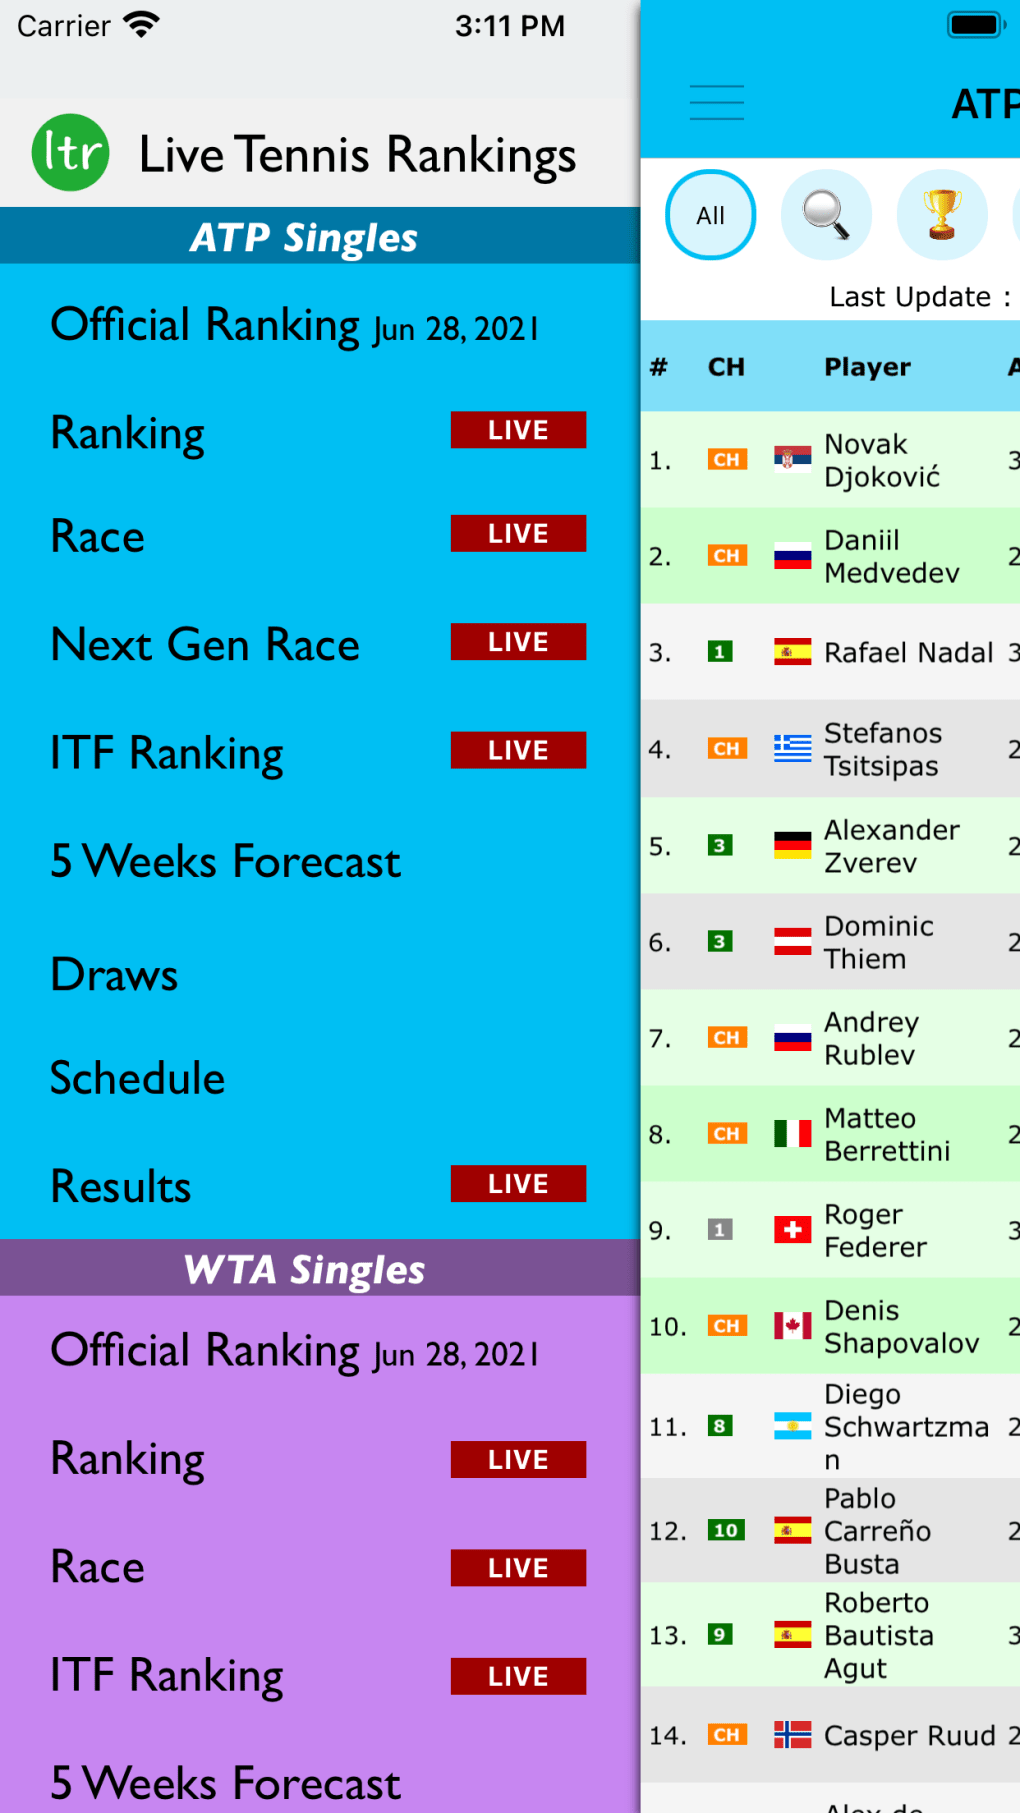 Live Tennis Rankings LTR for iPhone